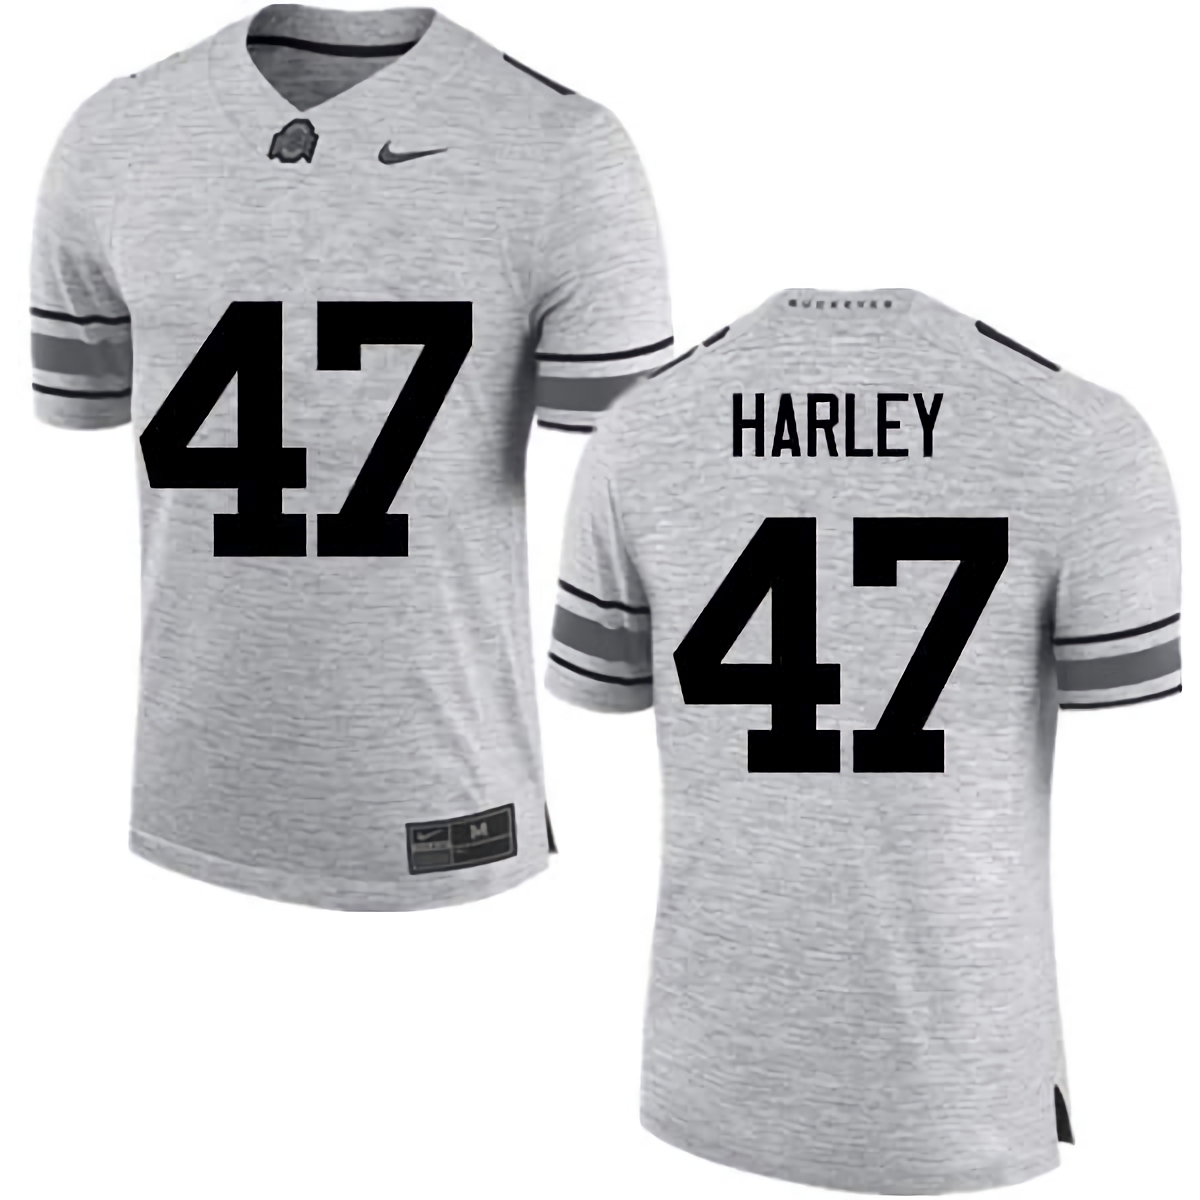 Chic Harley Ohio State Buckeyes Men's NCAA #47 Nike Gray College Stitched Football Jersey AMB1756HK